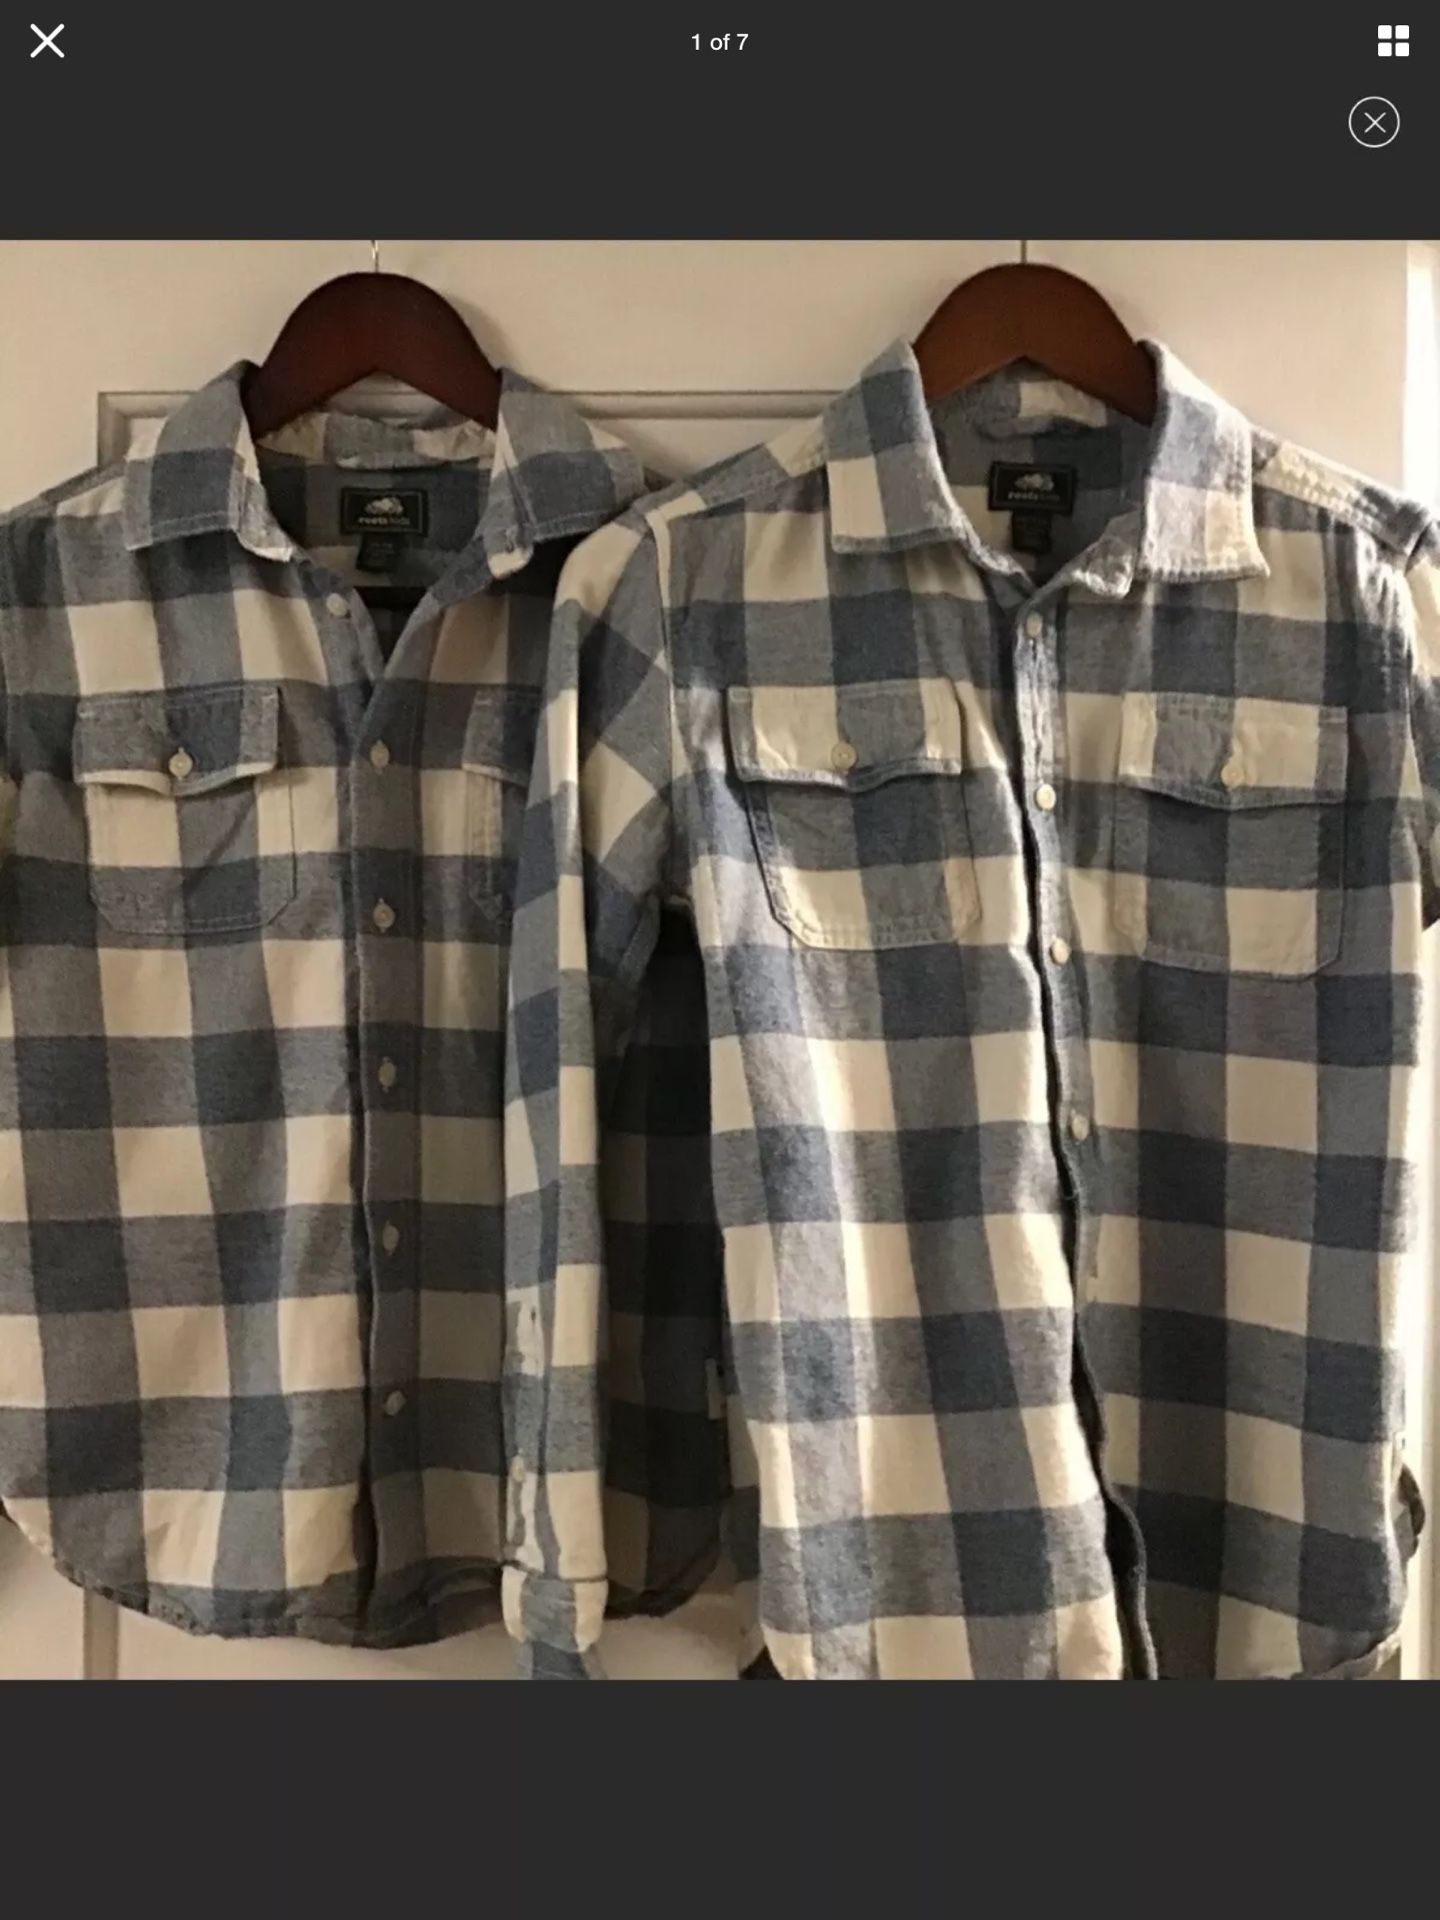 2 Roots Canada Boys Flannel button Down Shirts